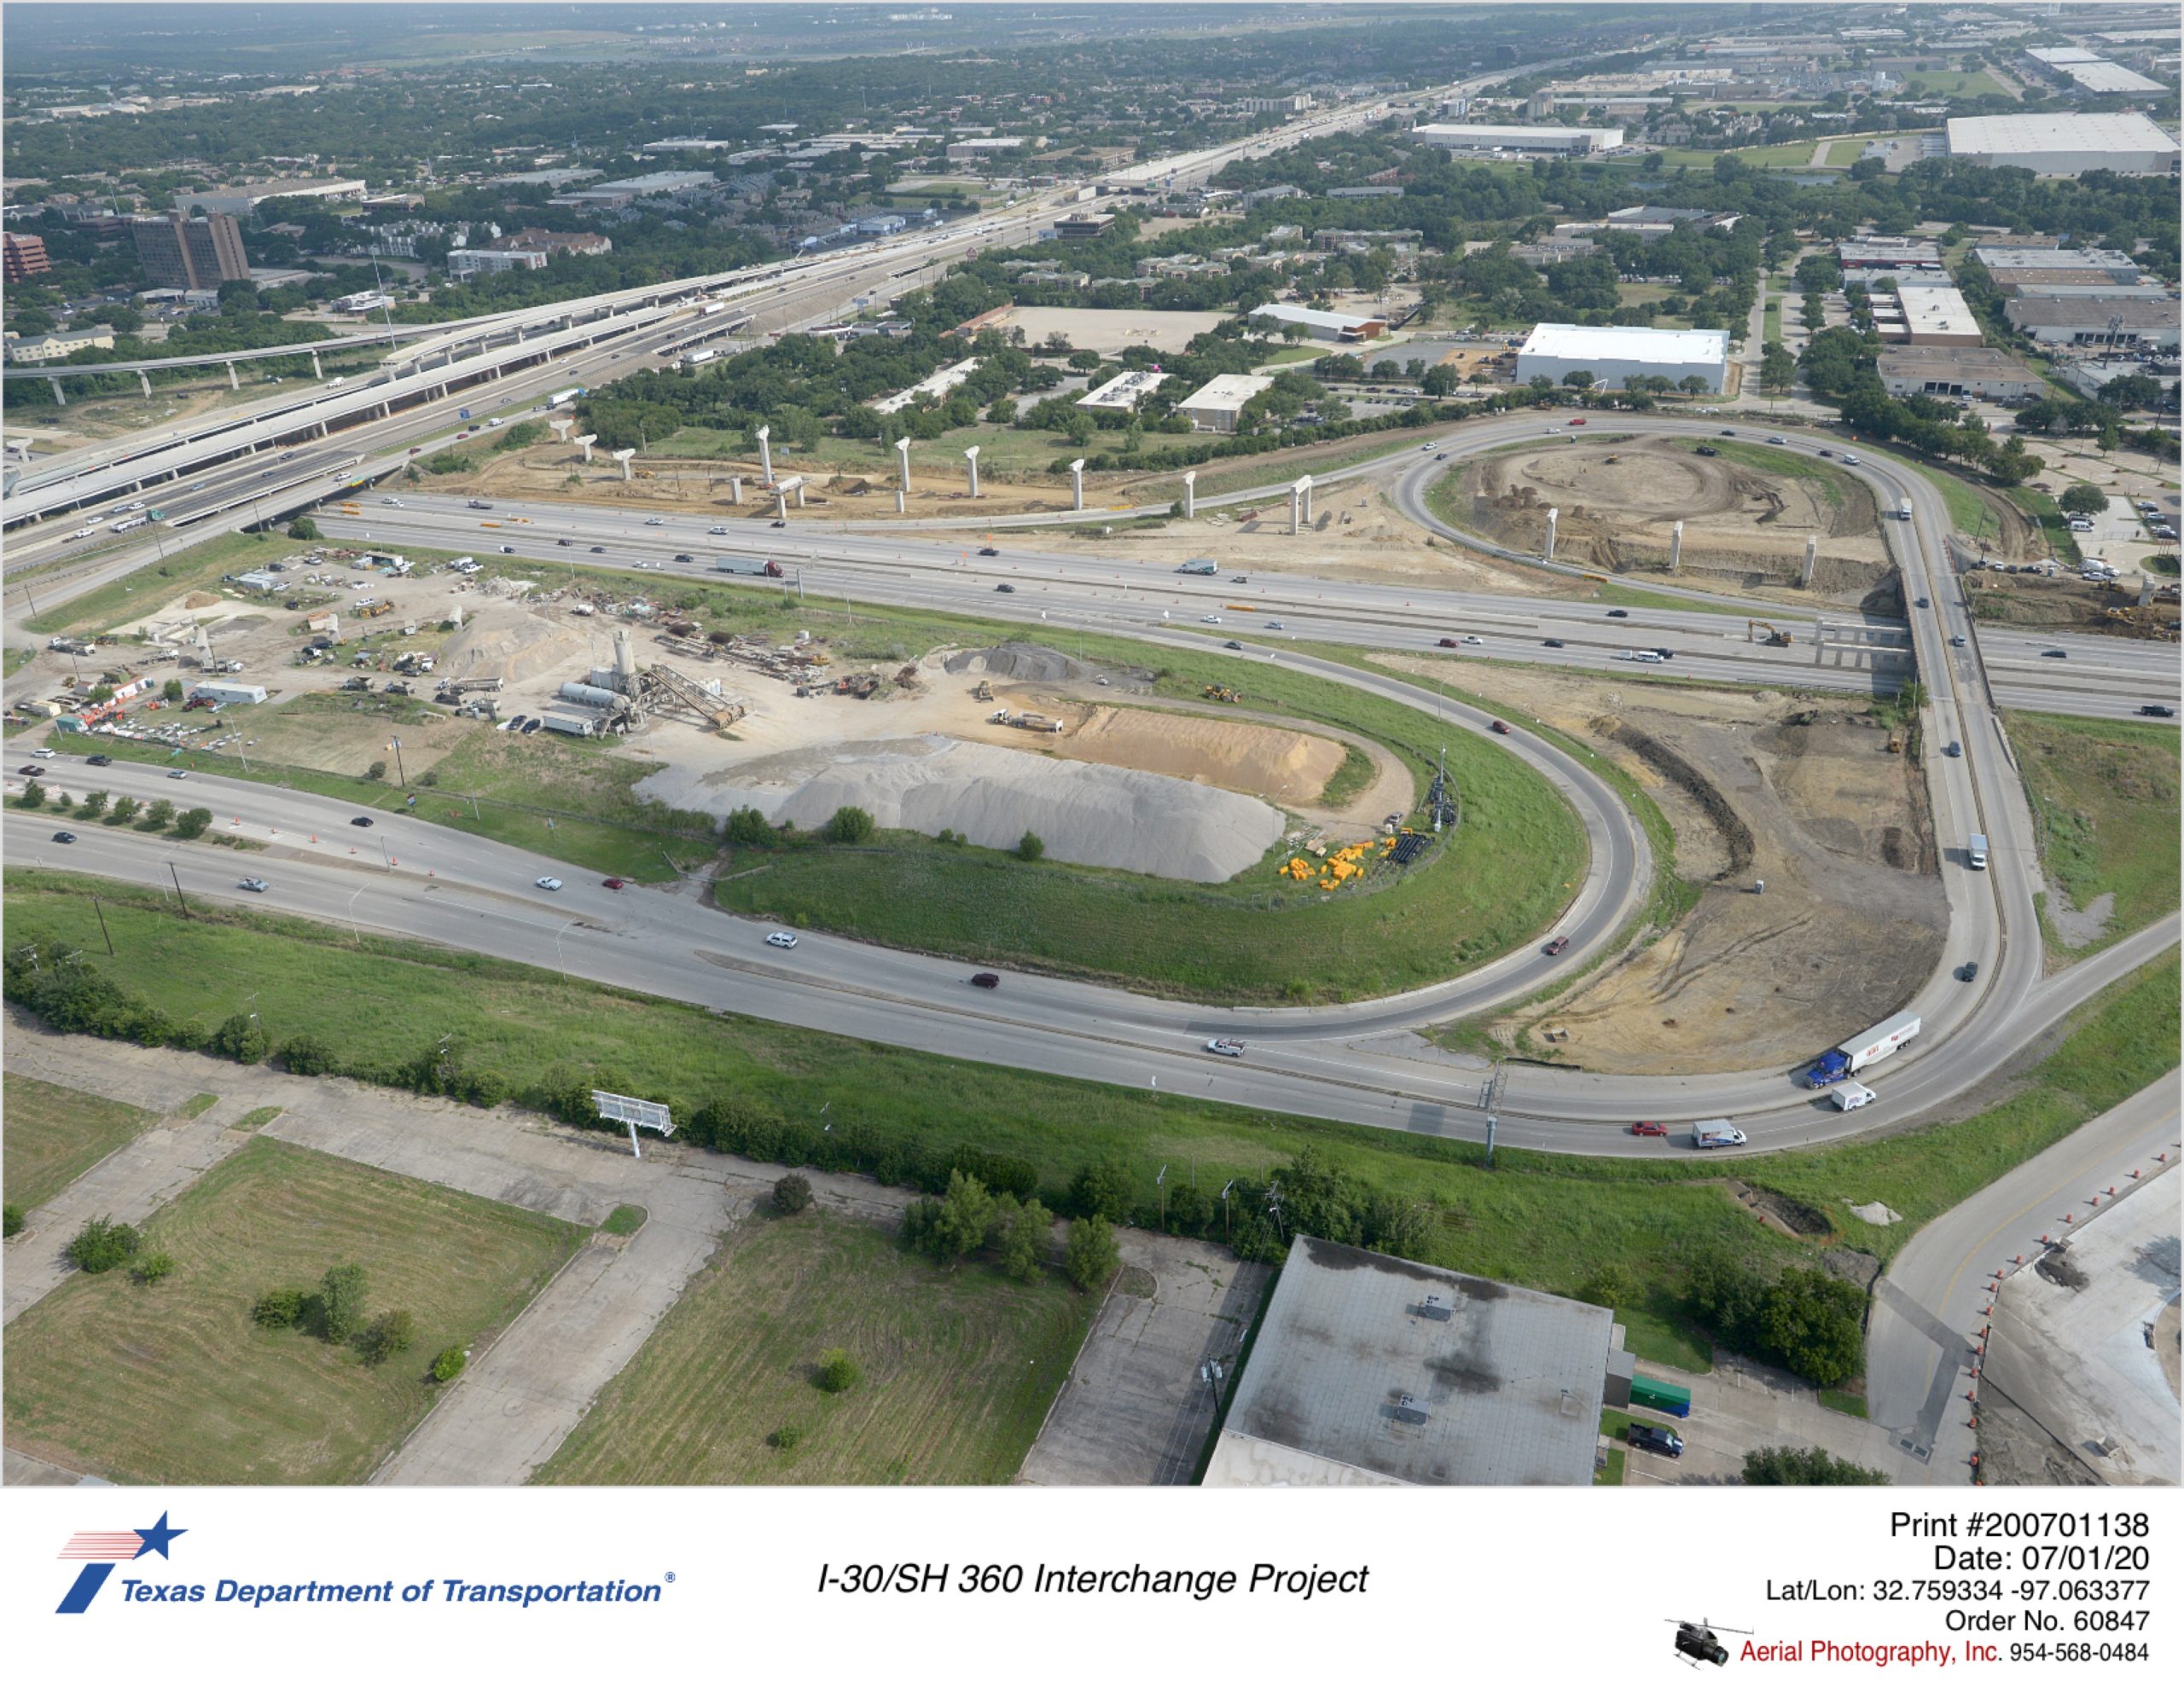 Looking northeast at I-30/Six Flags Dr interchange. Construction on west side of Six Flags Dr crossing of I-30 shown.